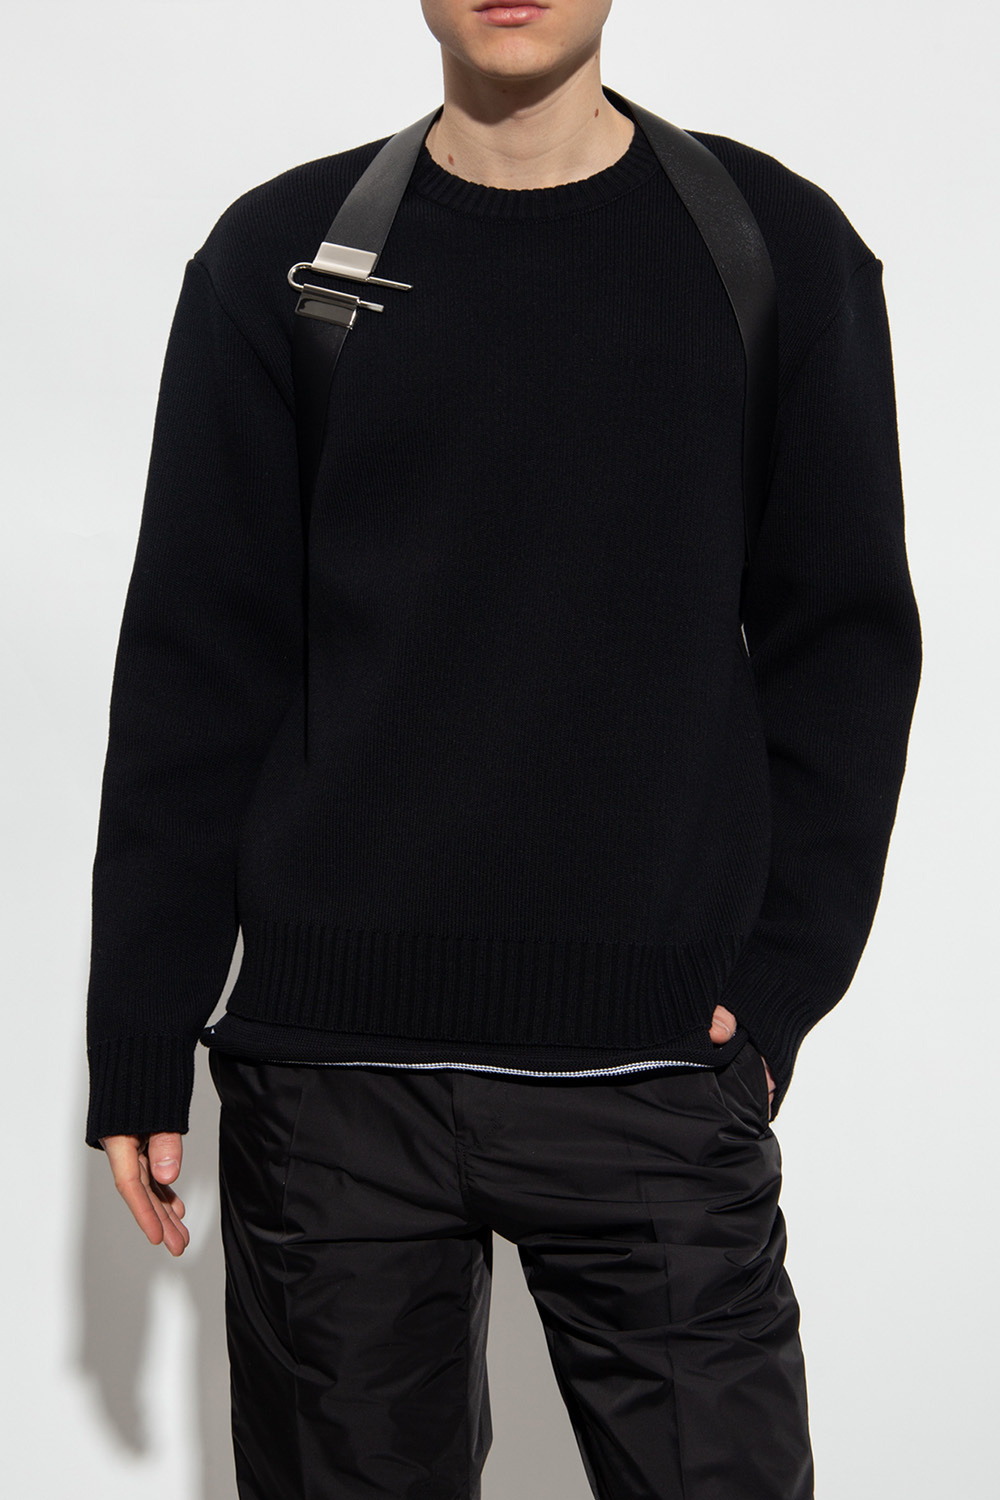 givenchy KENNY Wool sweater